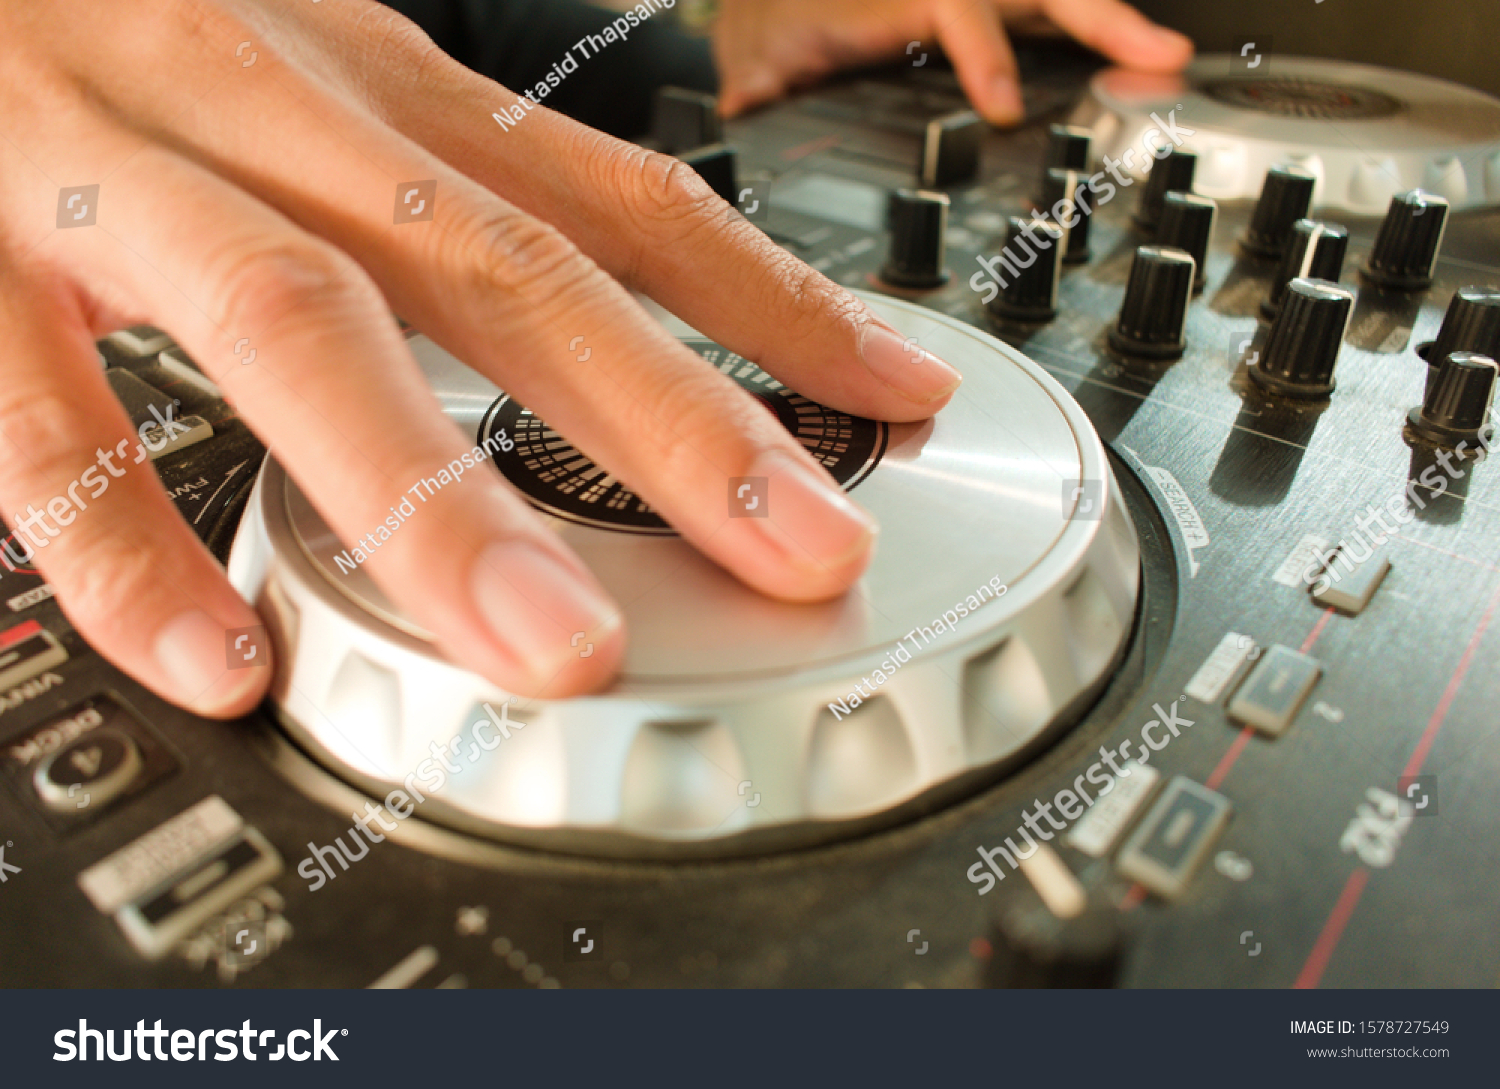 Finger of man that is spinning disc on Pro DJ controller to create music or beat. #1578727549